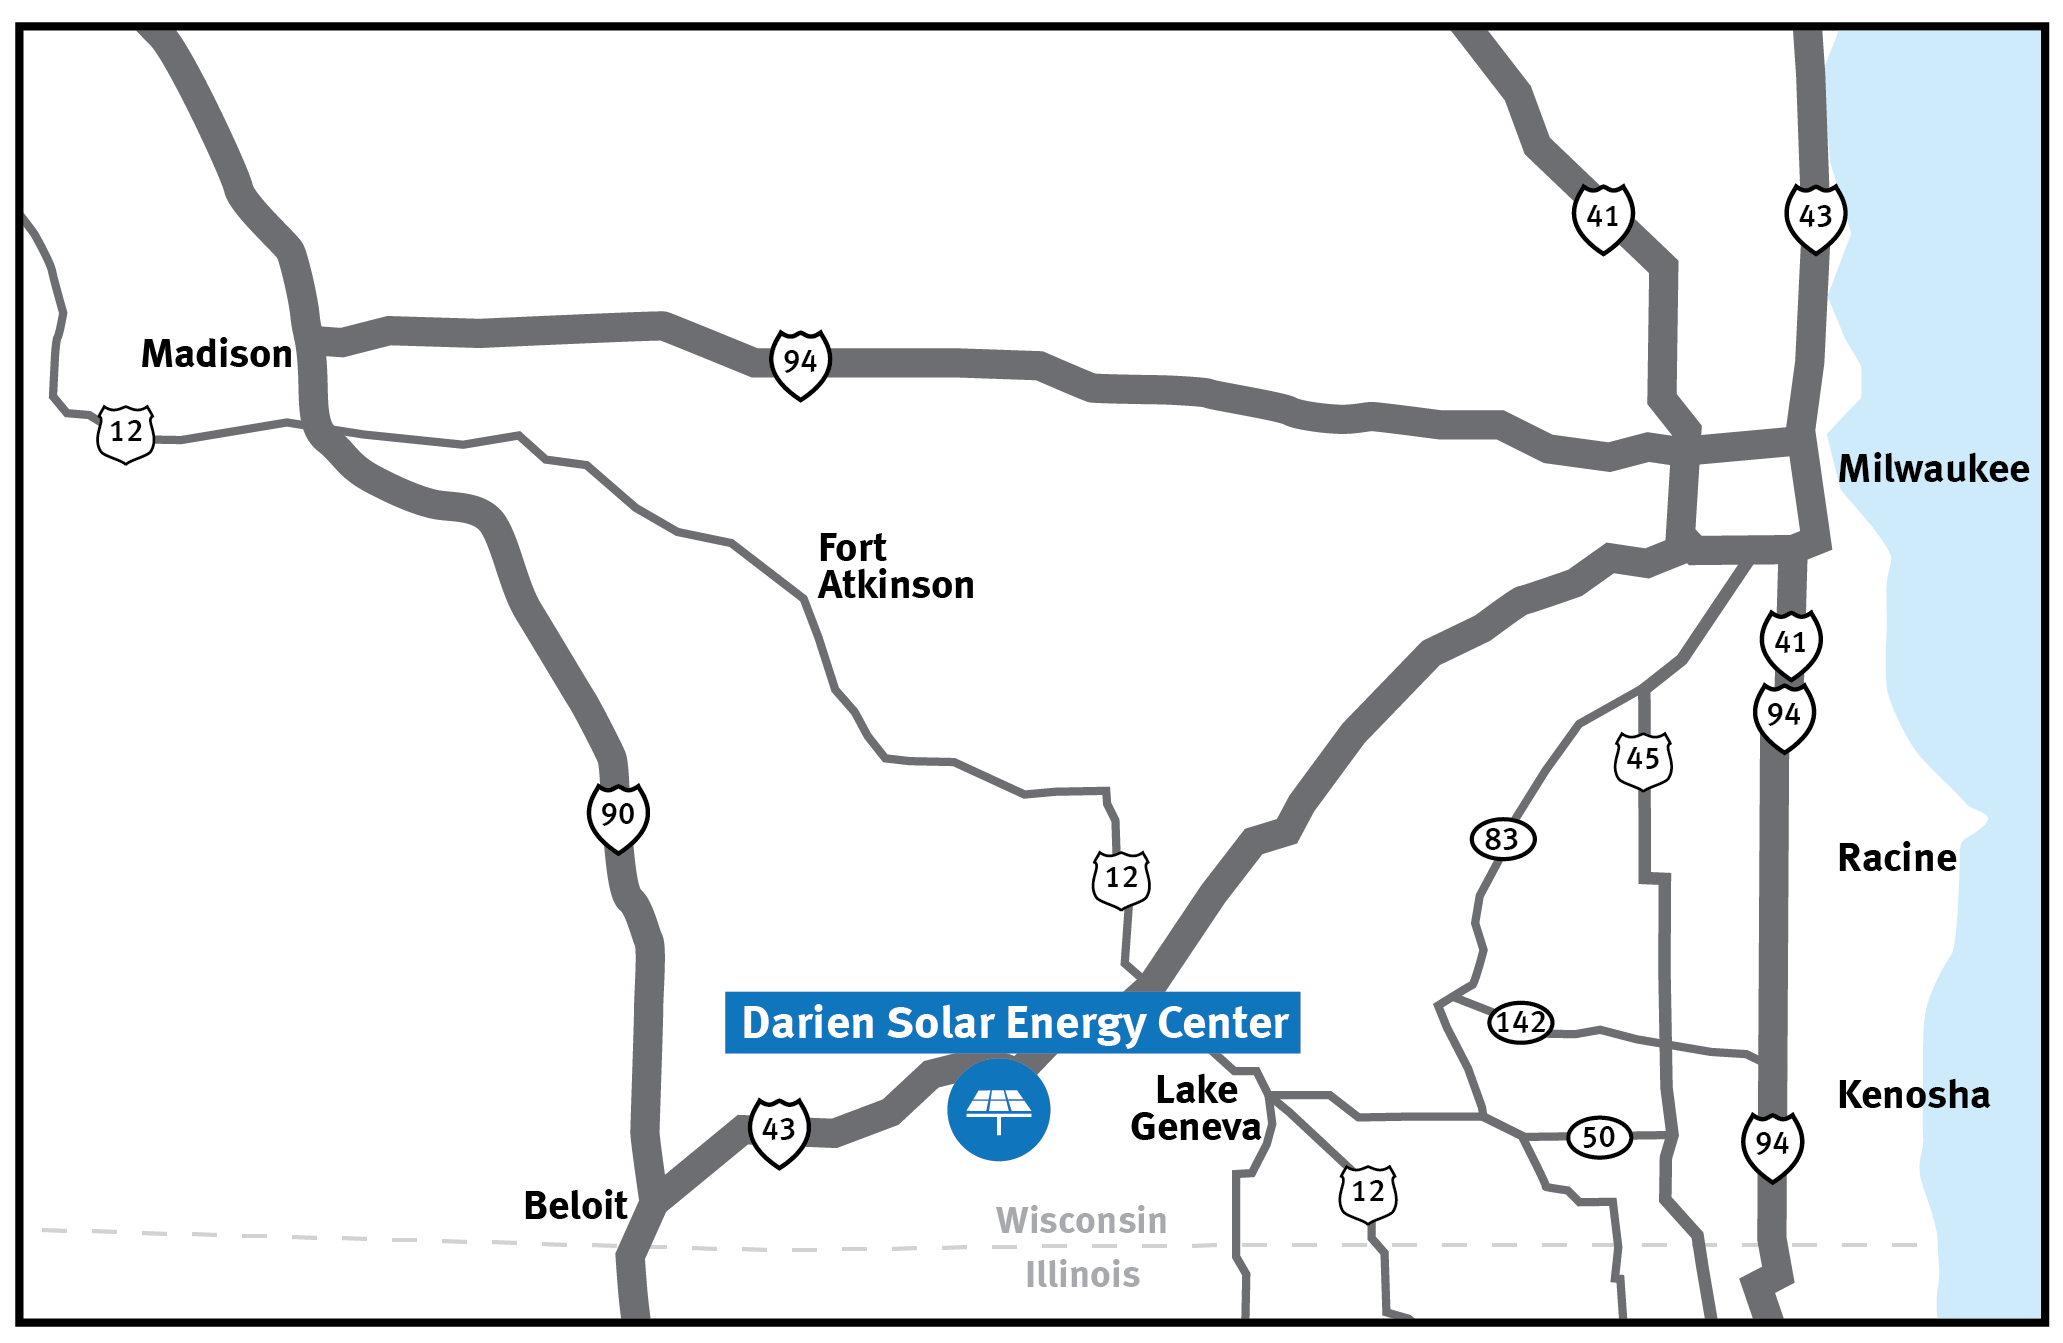 Map of Darien Solar Energy Center in southern Wisconsin